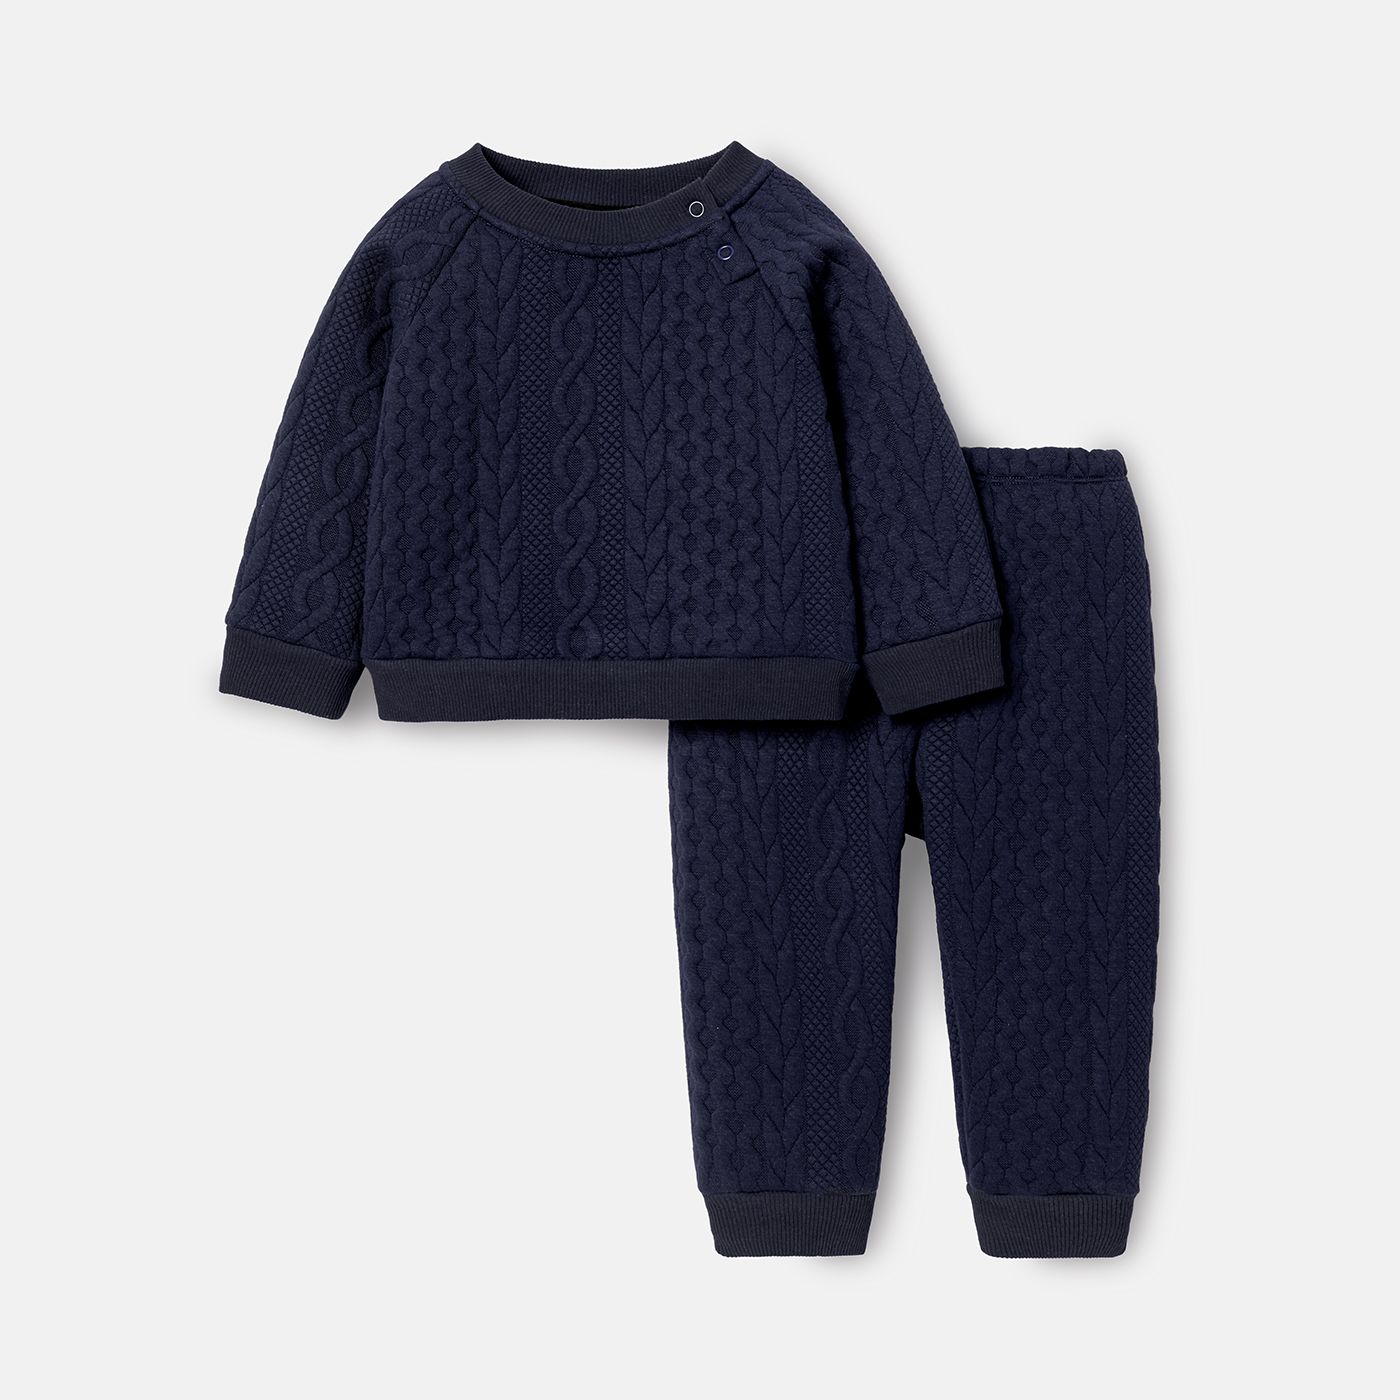 

2pcs Baby Boy Solid Color Cable Knit Textured Long-sleeve Sweatshirt and Elasticized Pants Set